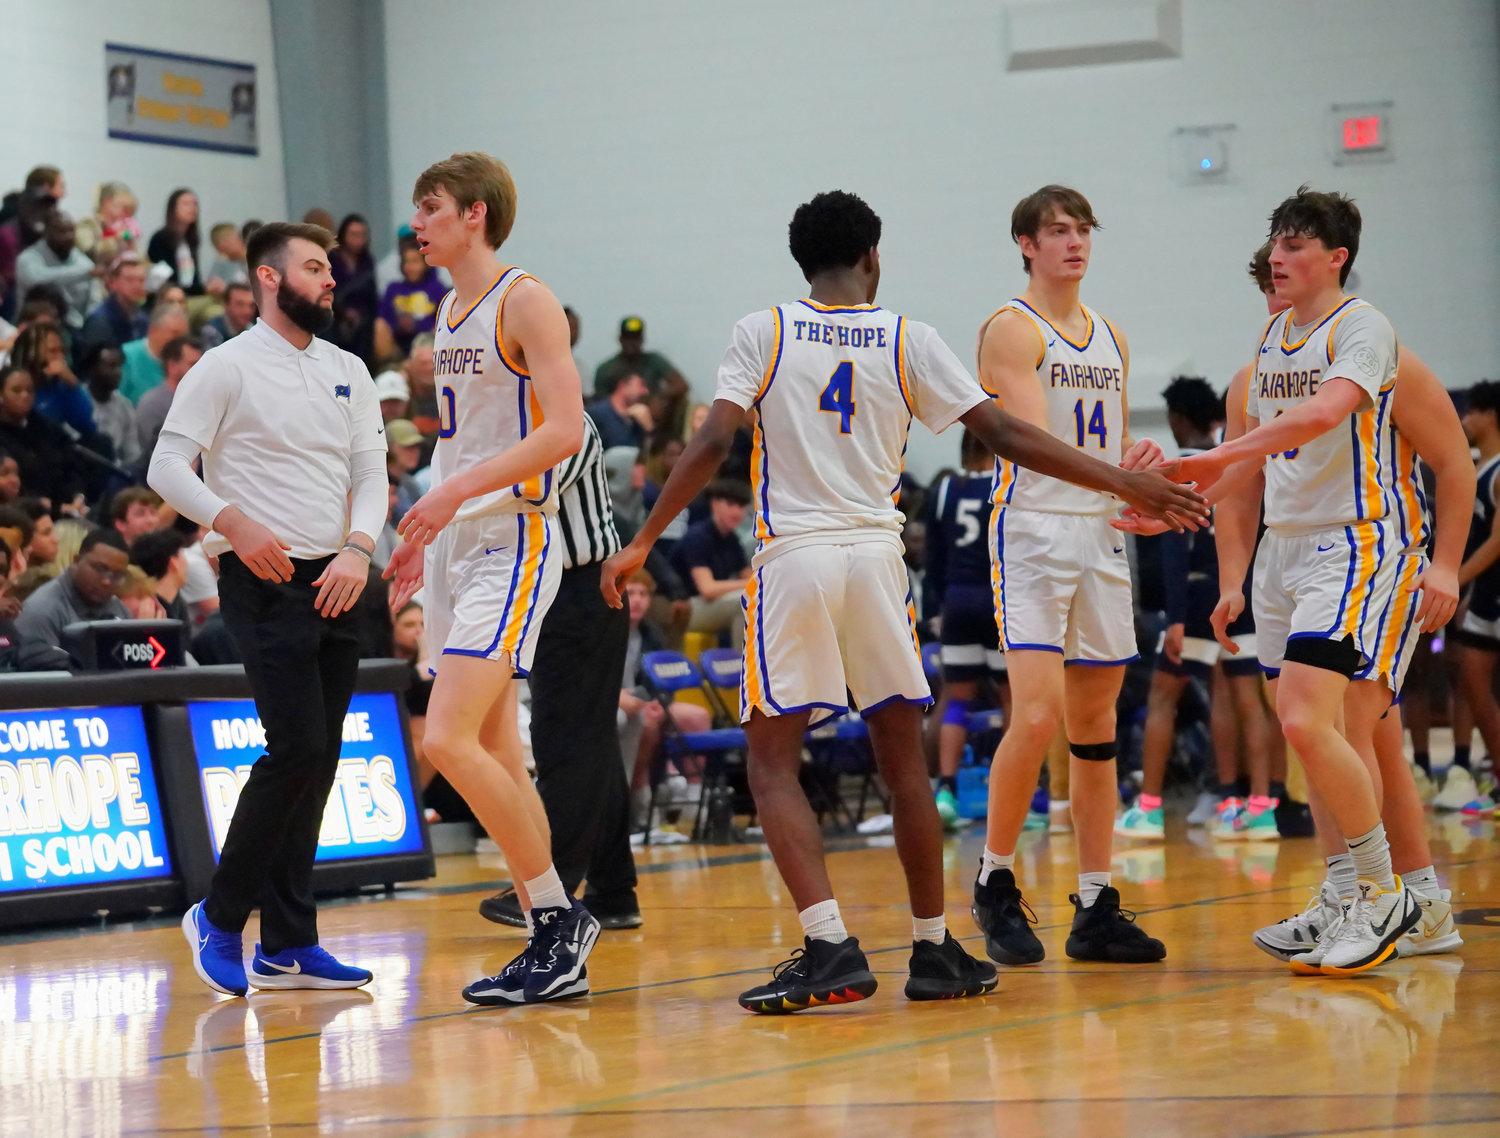 The Fairhope Pirates walk off the court during a timeout in their home non-area game against the Baker Hornets Dec. 13, 2022. Fairhope entered play Tuesday night as one of three local teams in first place in its respective area with only a week left in the regular season.